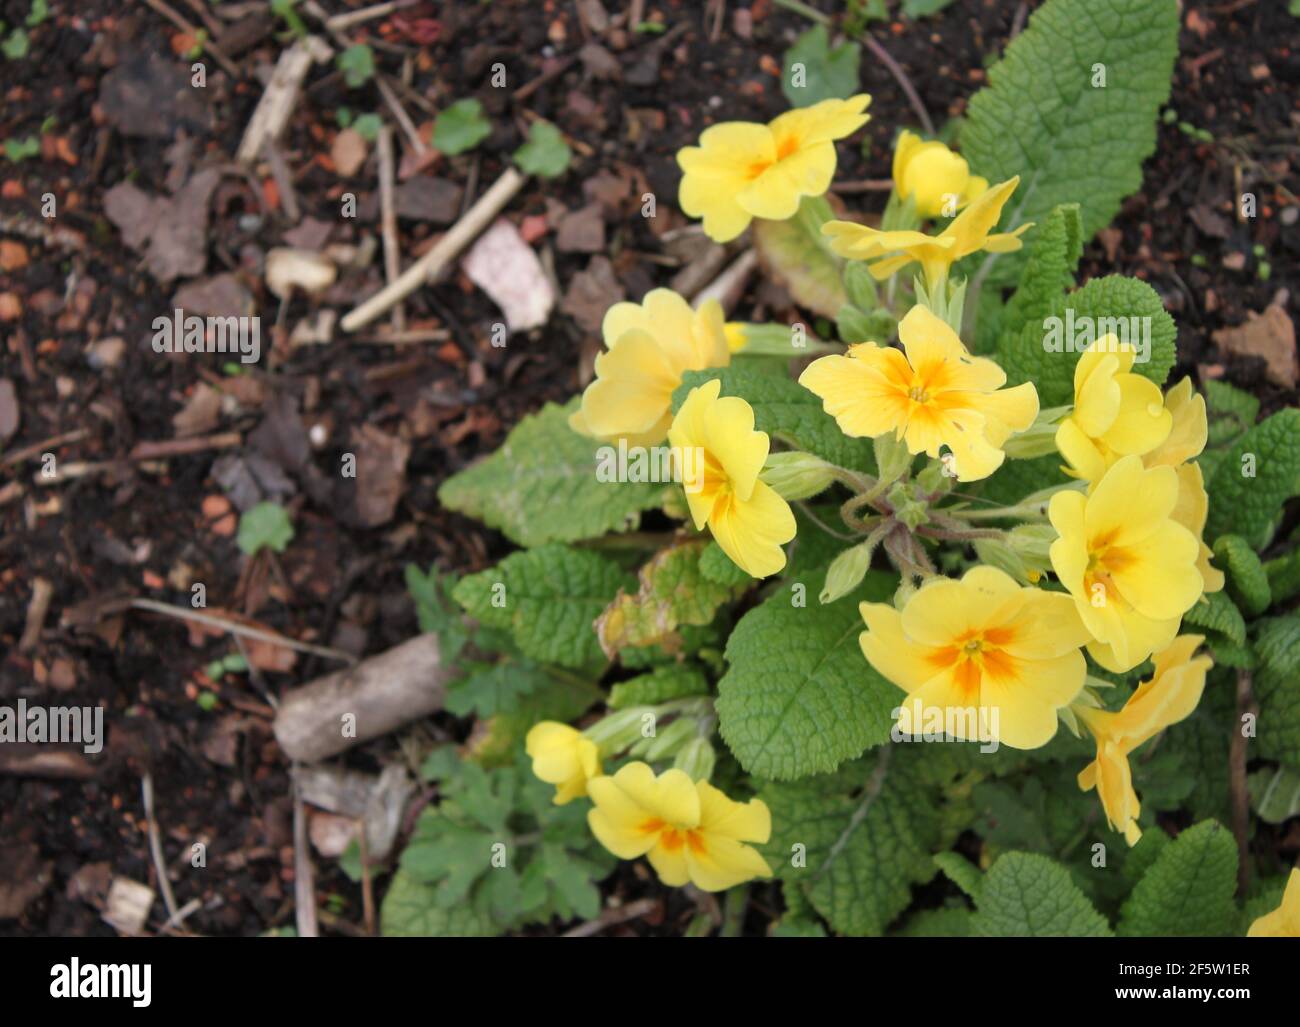 Beautiful yellow primroses with orange centres growing in the outdoors.  Yellow primroses growing in woodland walking trails, spring season in the UK. Stock Photo